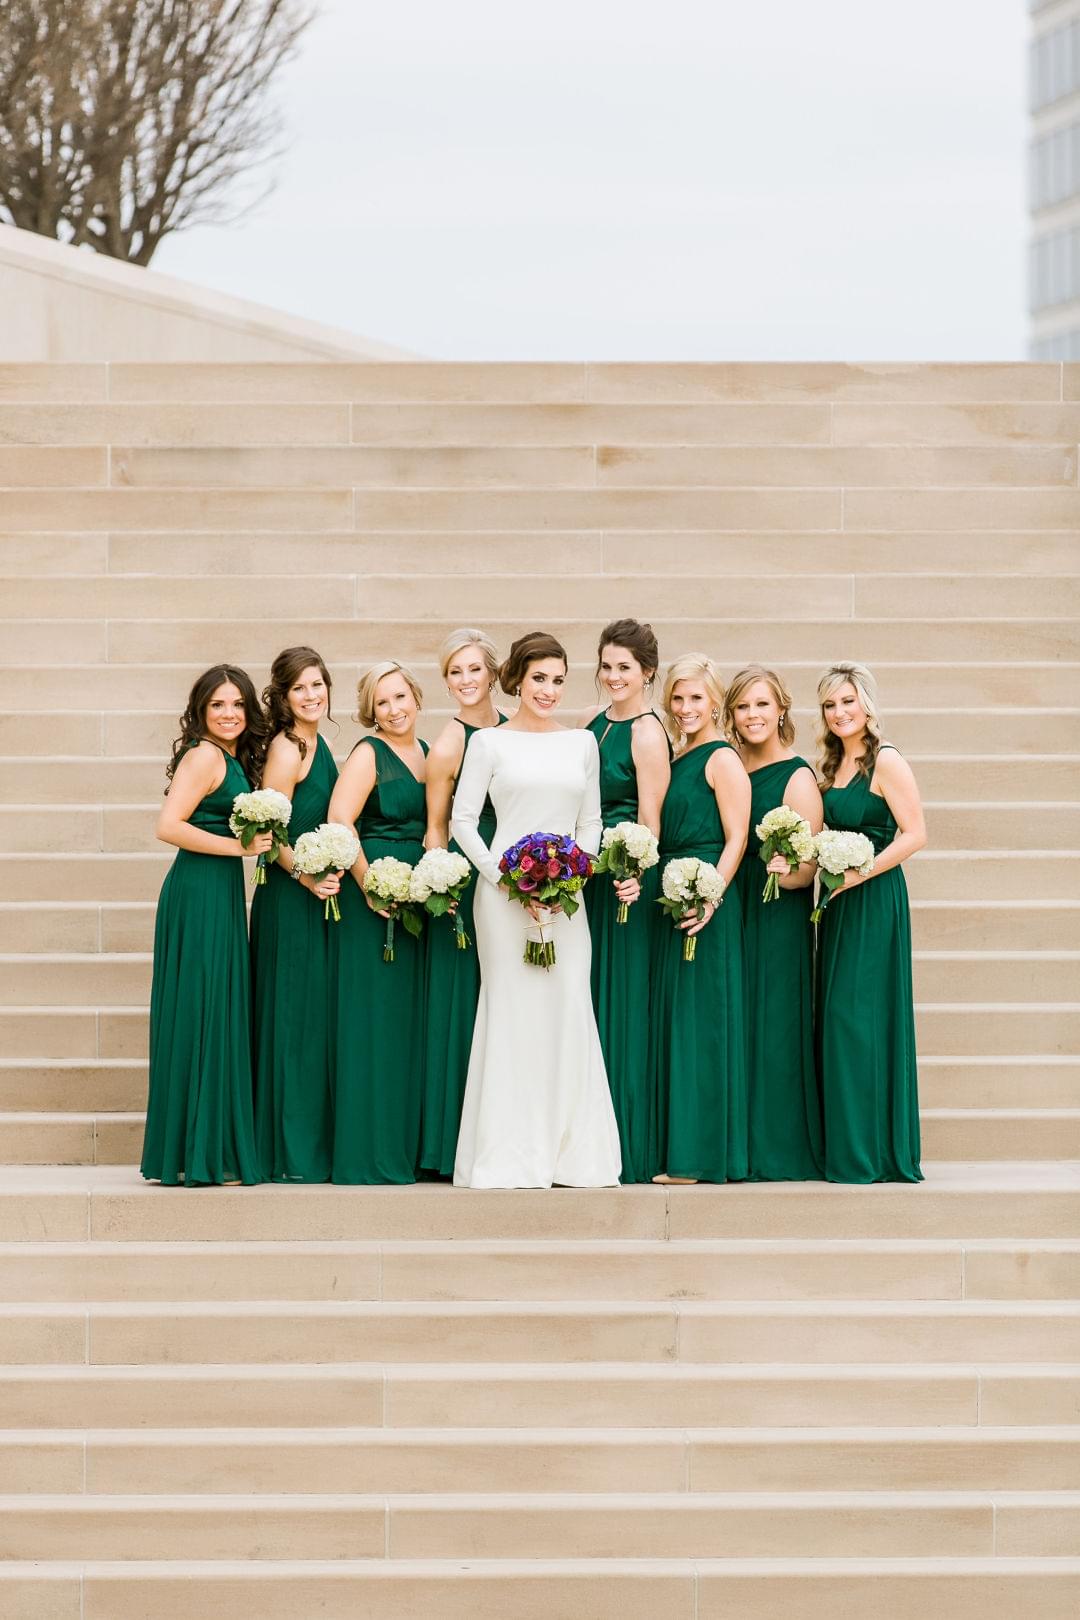 Emerald Green Long Bridesmaid Dresses. Catherine Rhodes Photography. // Get inspired with this gallery filled with 50+ awesome wedding ideas for your bridesmaids, including dresses, proposals & more. // mysweetengagement.com